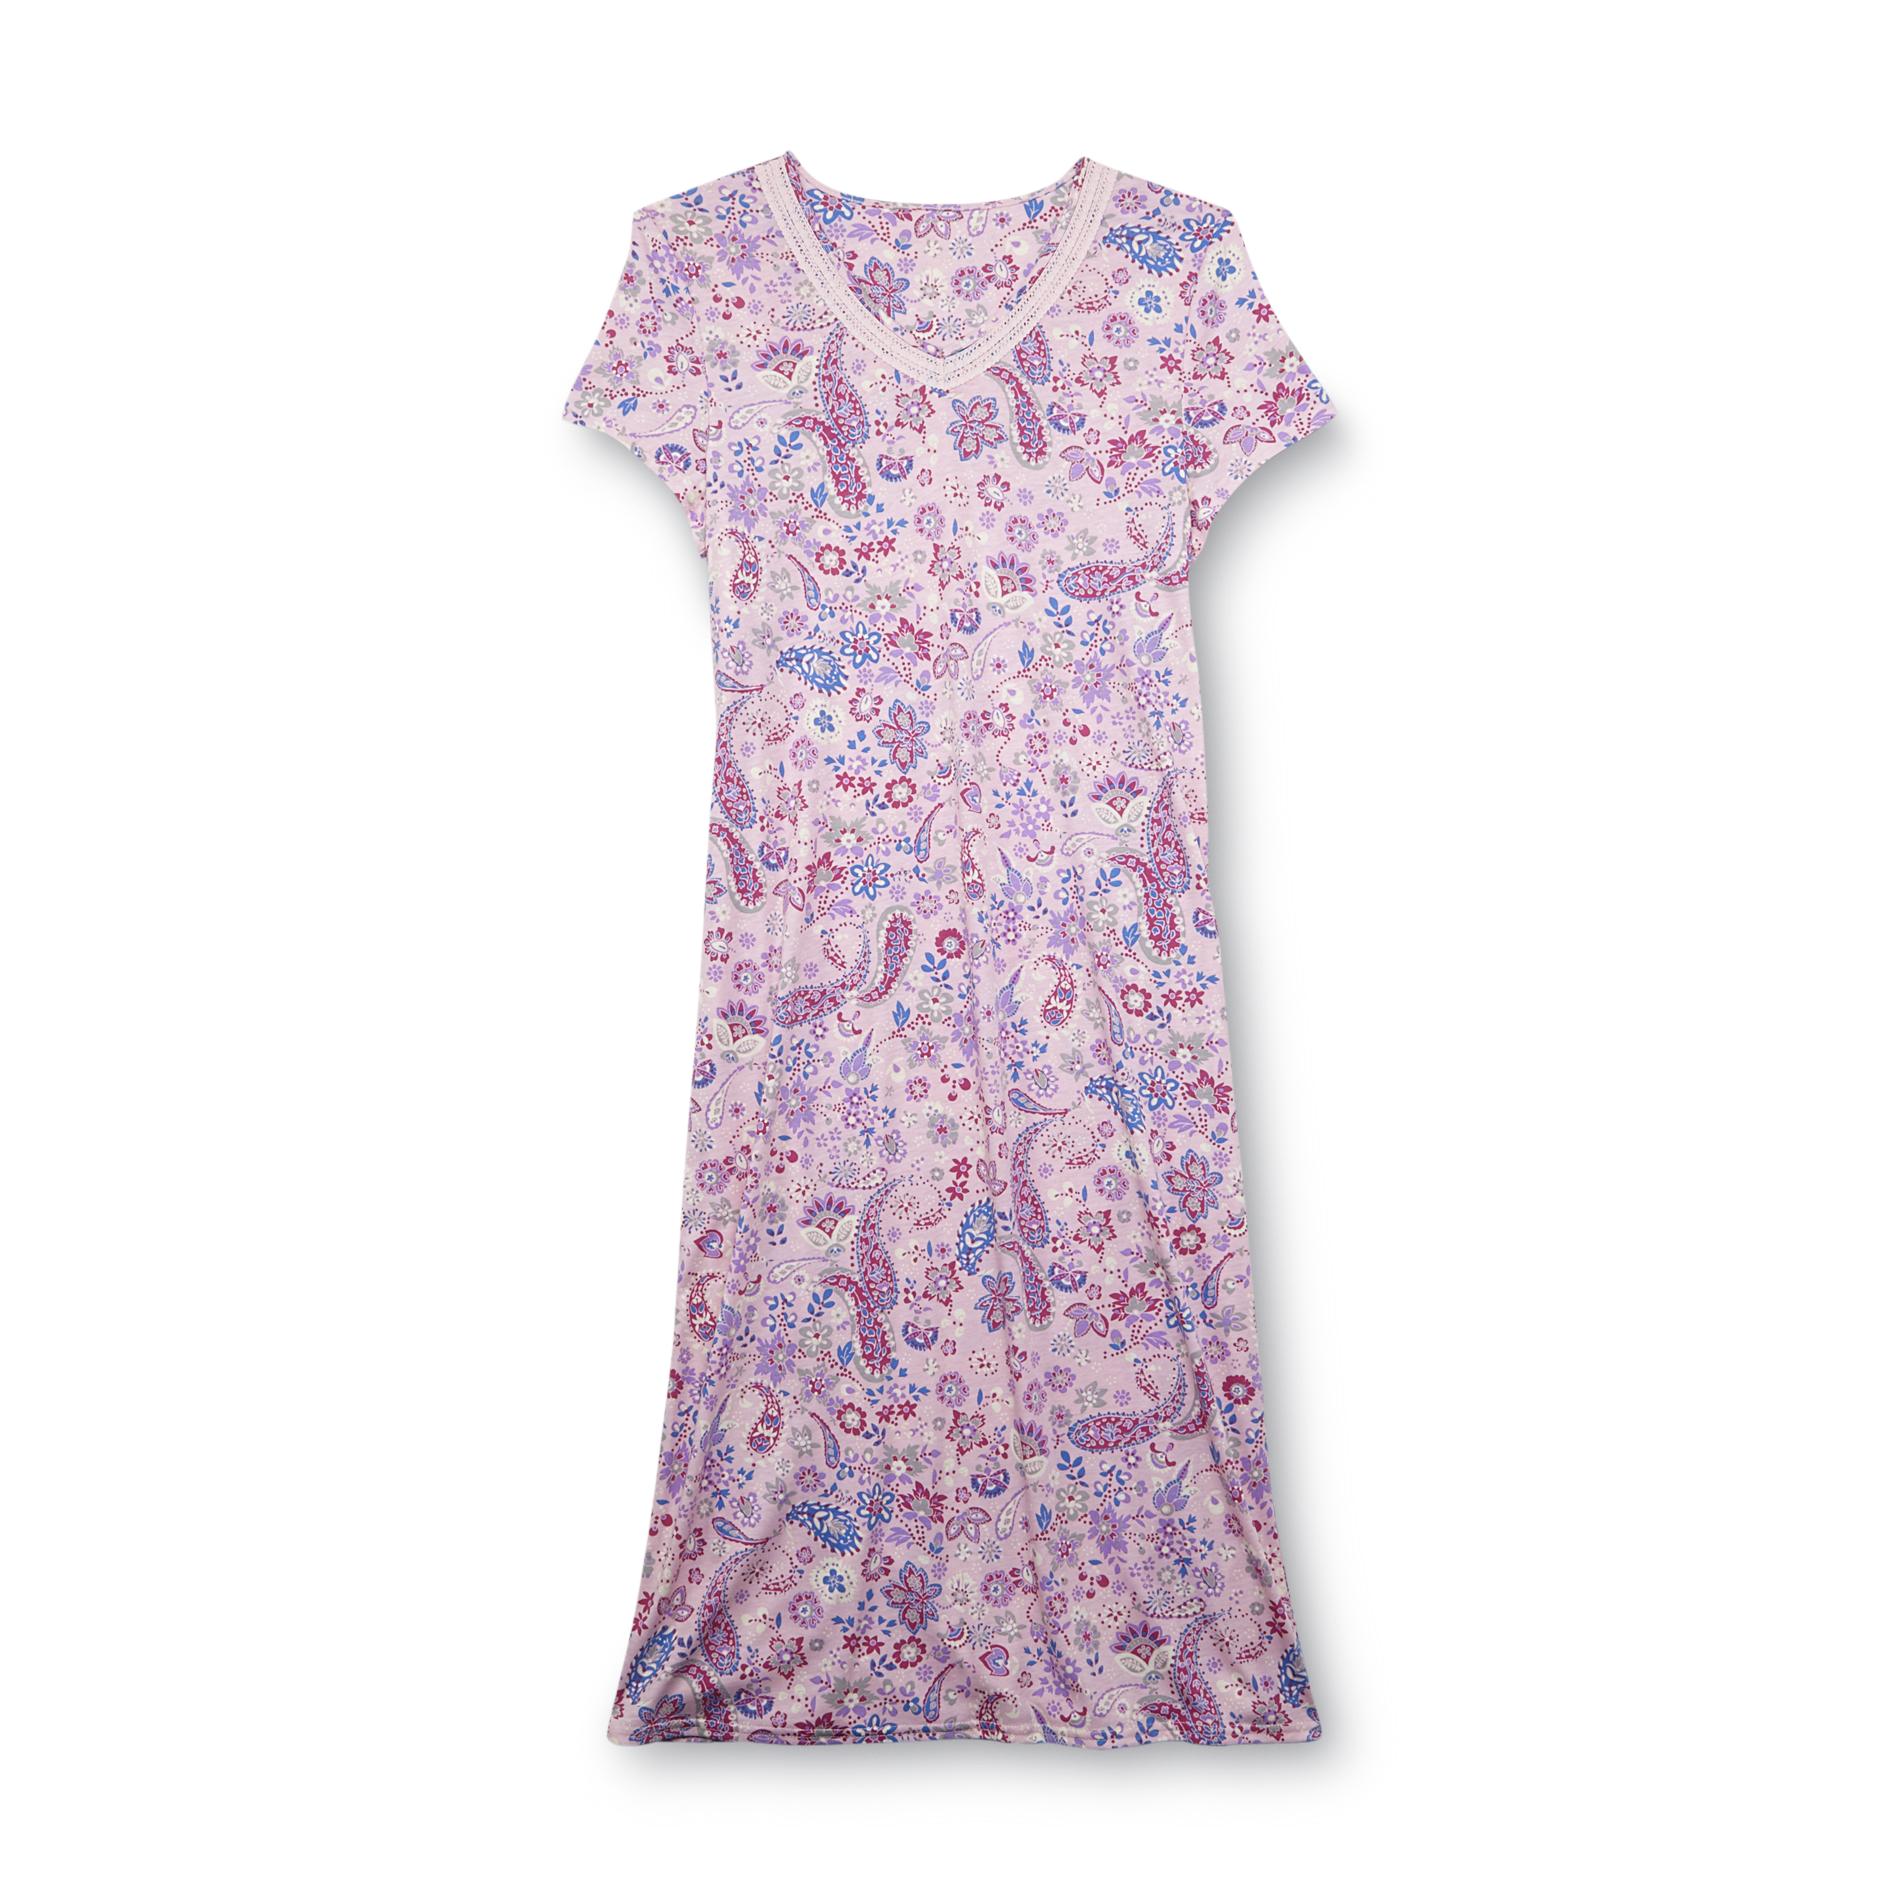 Pink K Women's Short-Sleeve Nightgown - Floral & Paisley